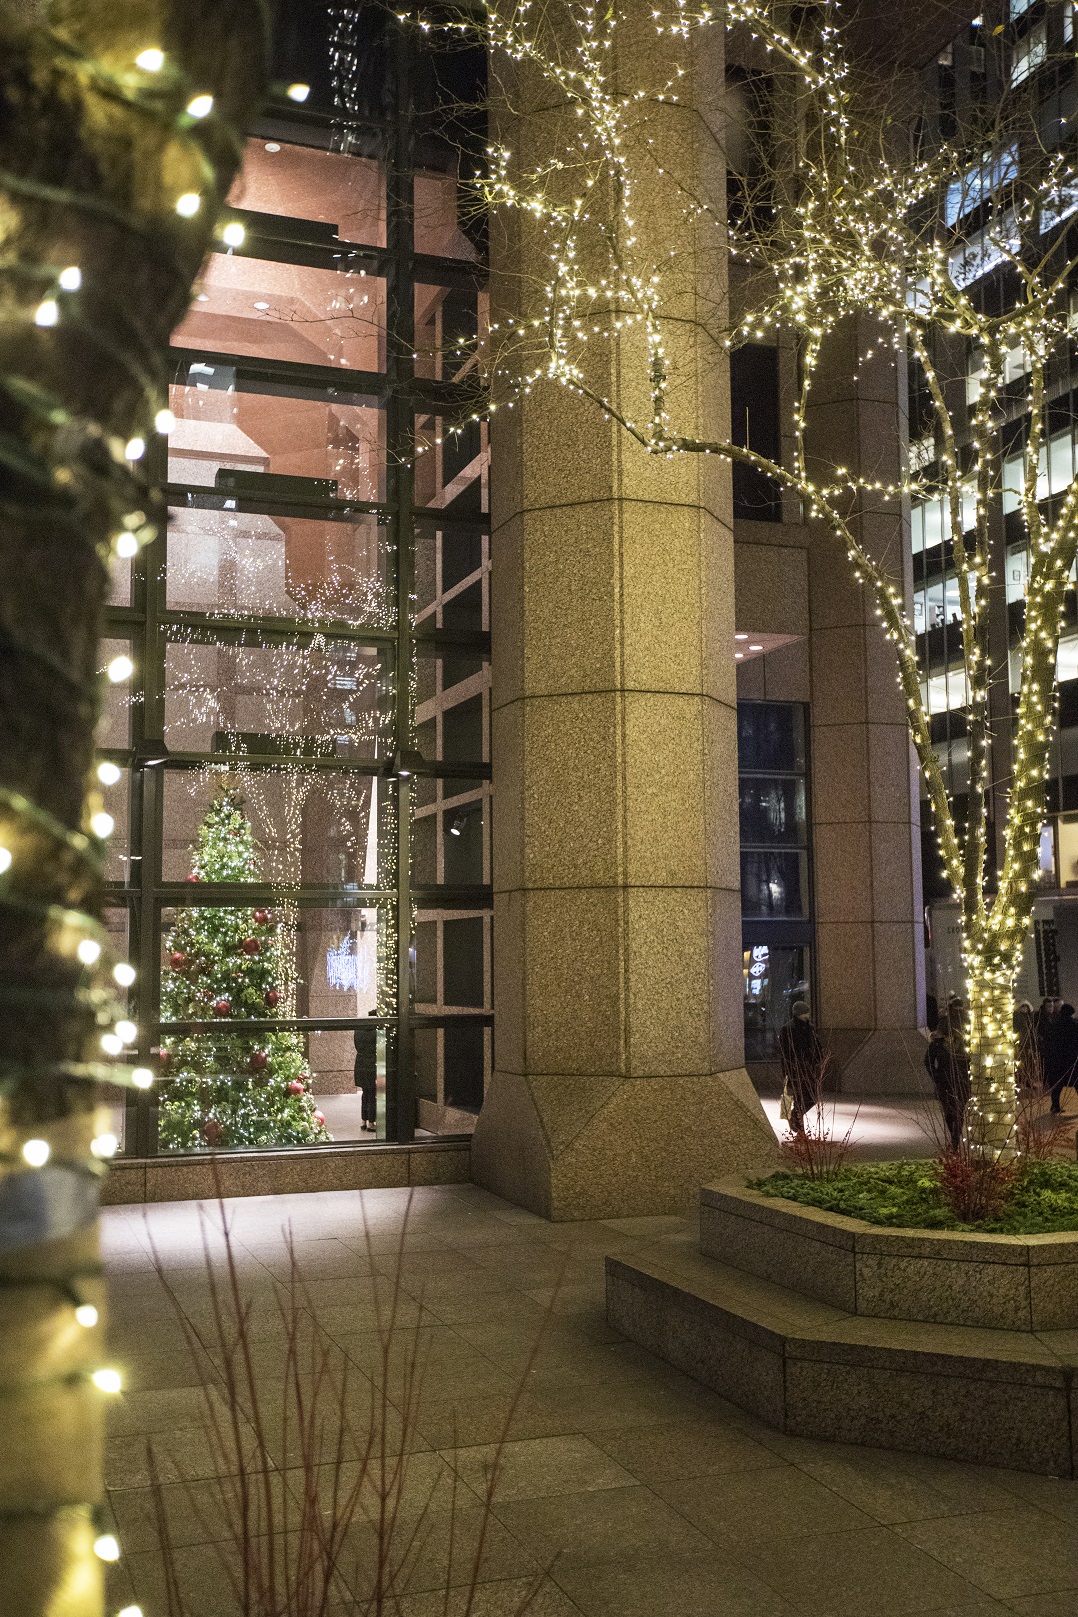 Warm LED lights paint this public plaza and are complemented with festive winter plantings